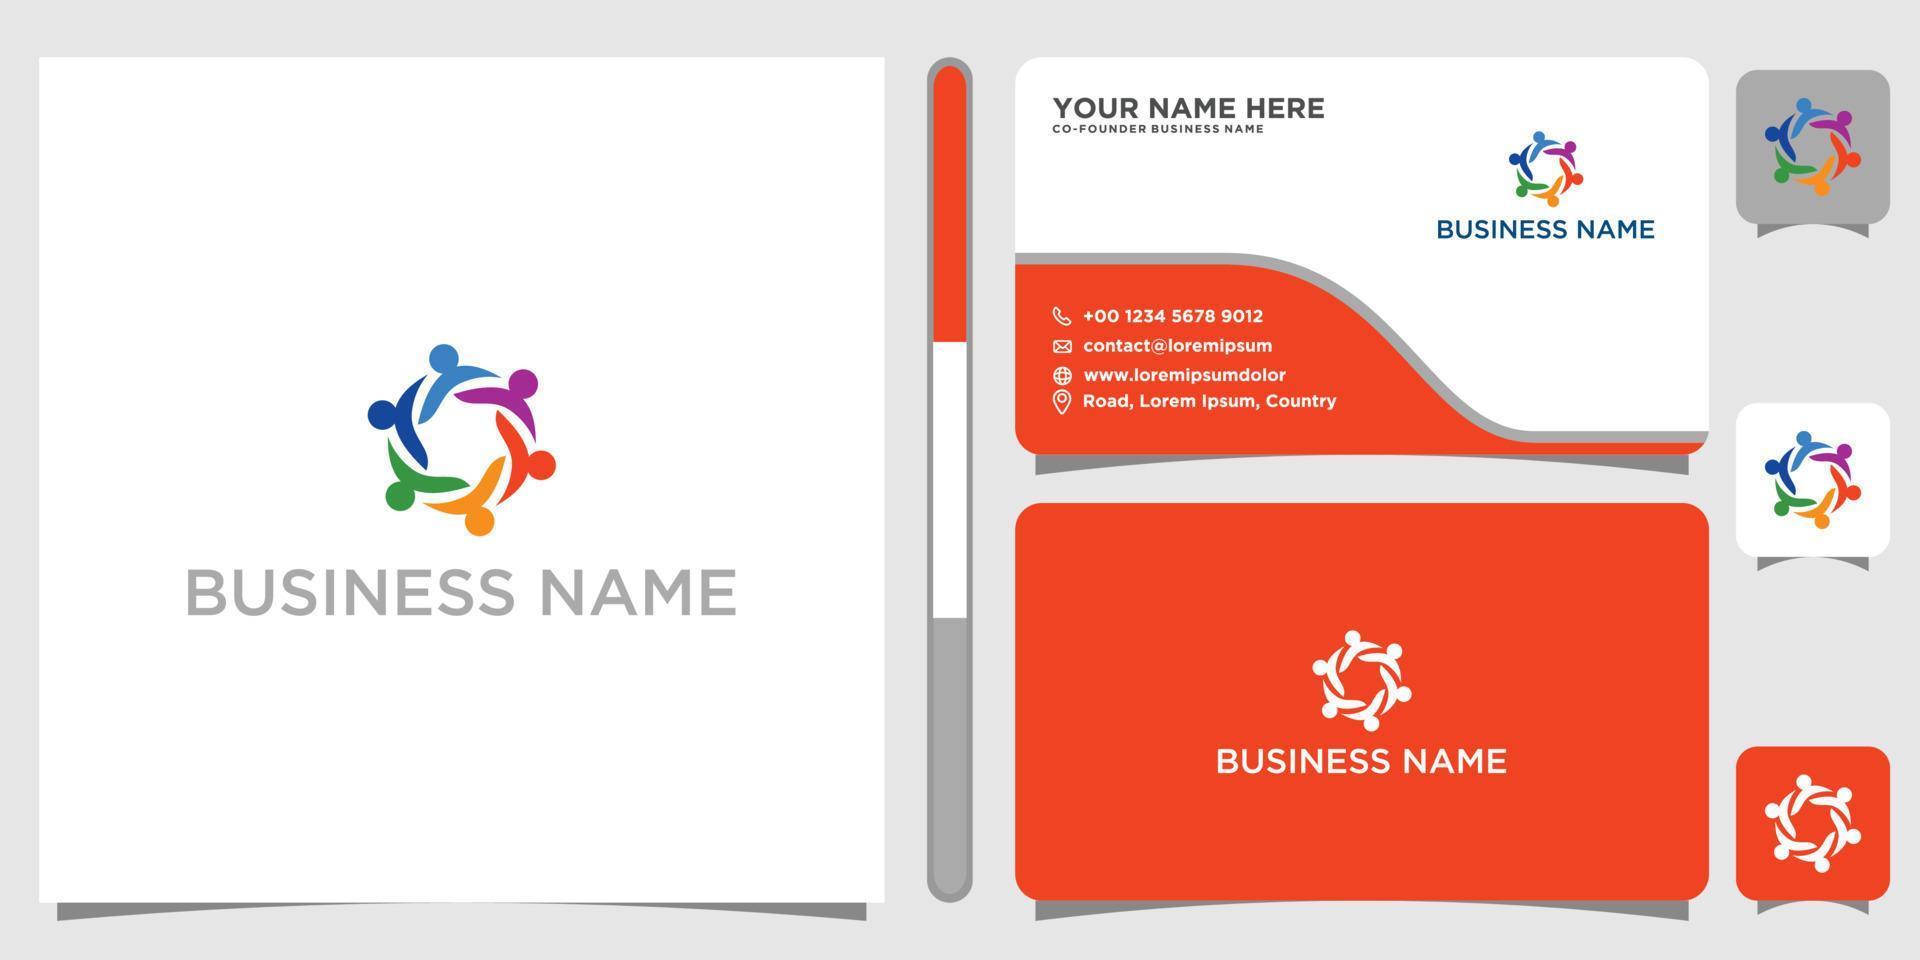 Friendship, Teamwork, People Connectivity logo Design Inspiration with business card vector